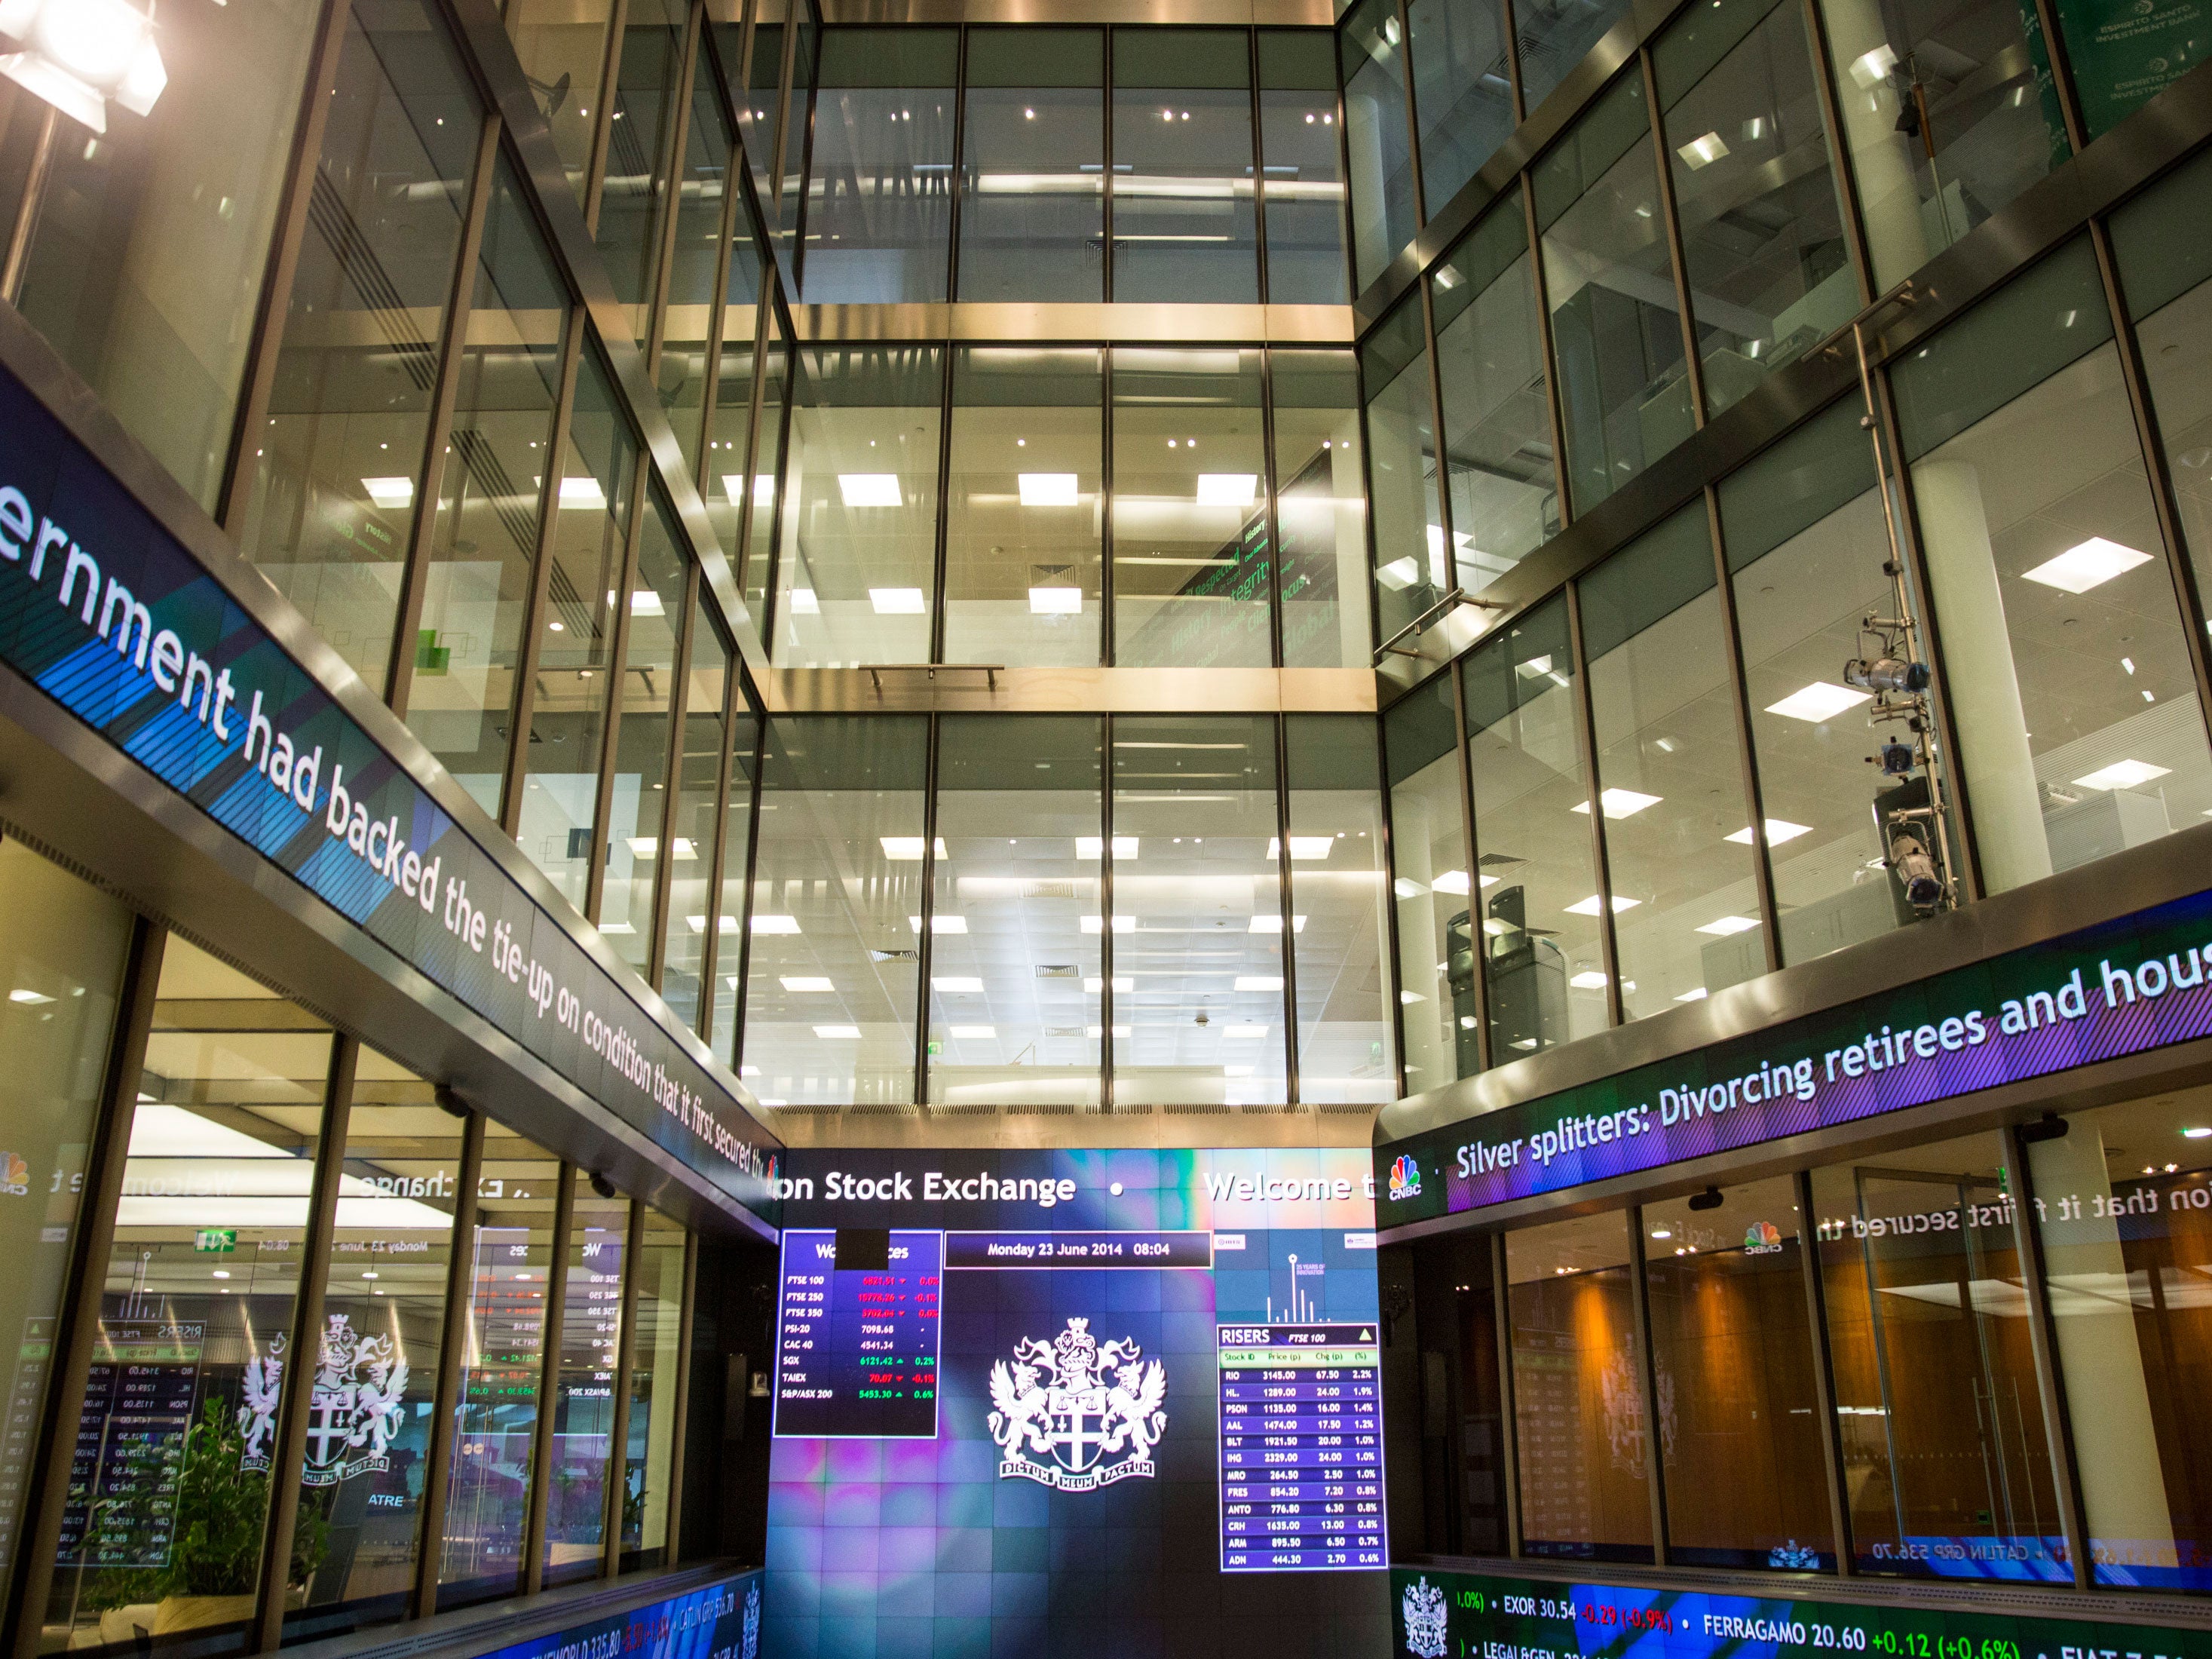 LSE revealed that 219 companies came to its markets last year – the highest number since 2007